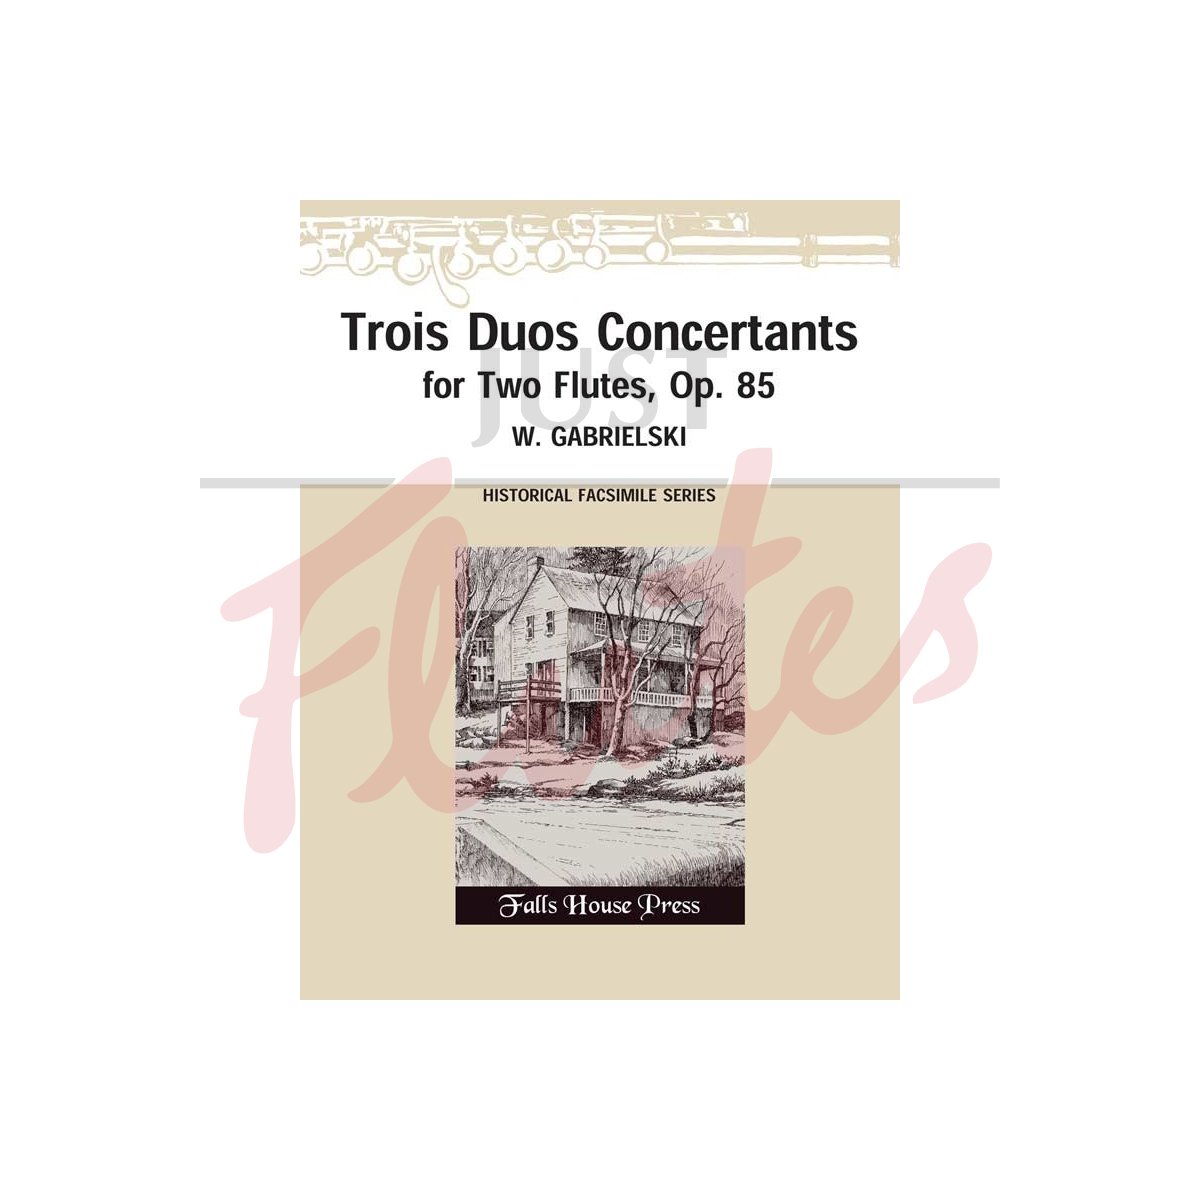 Trois Duos Concertants for Two Flutes